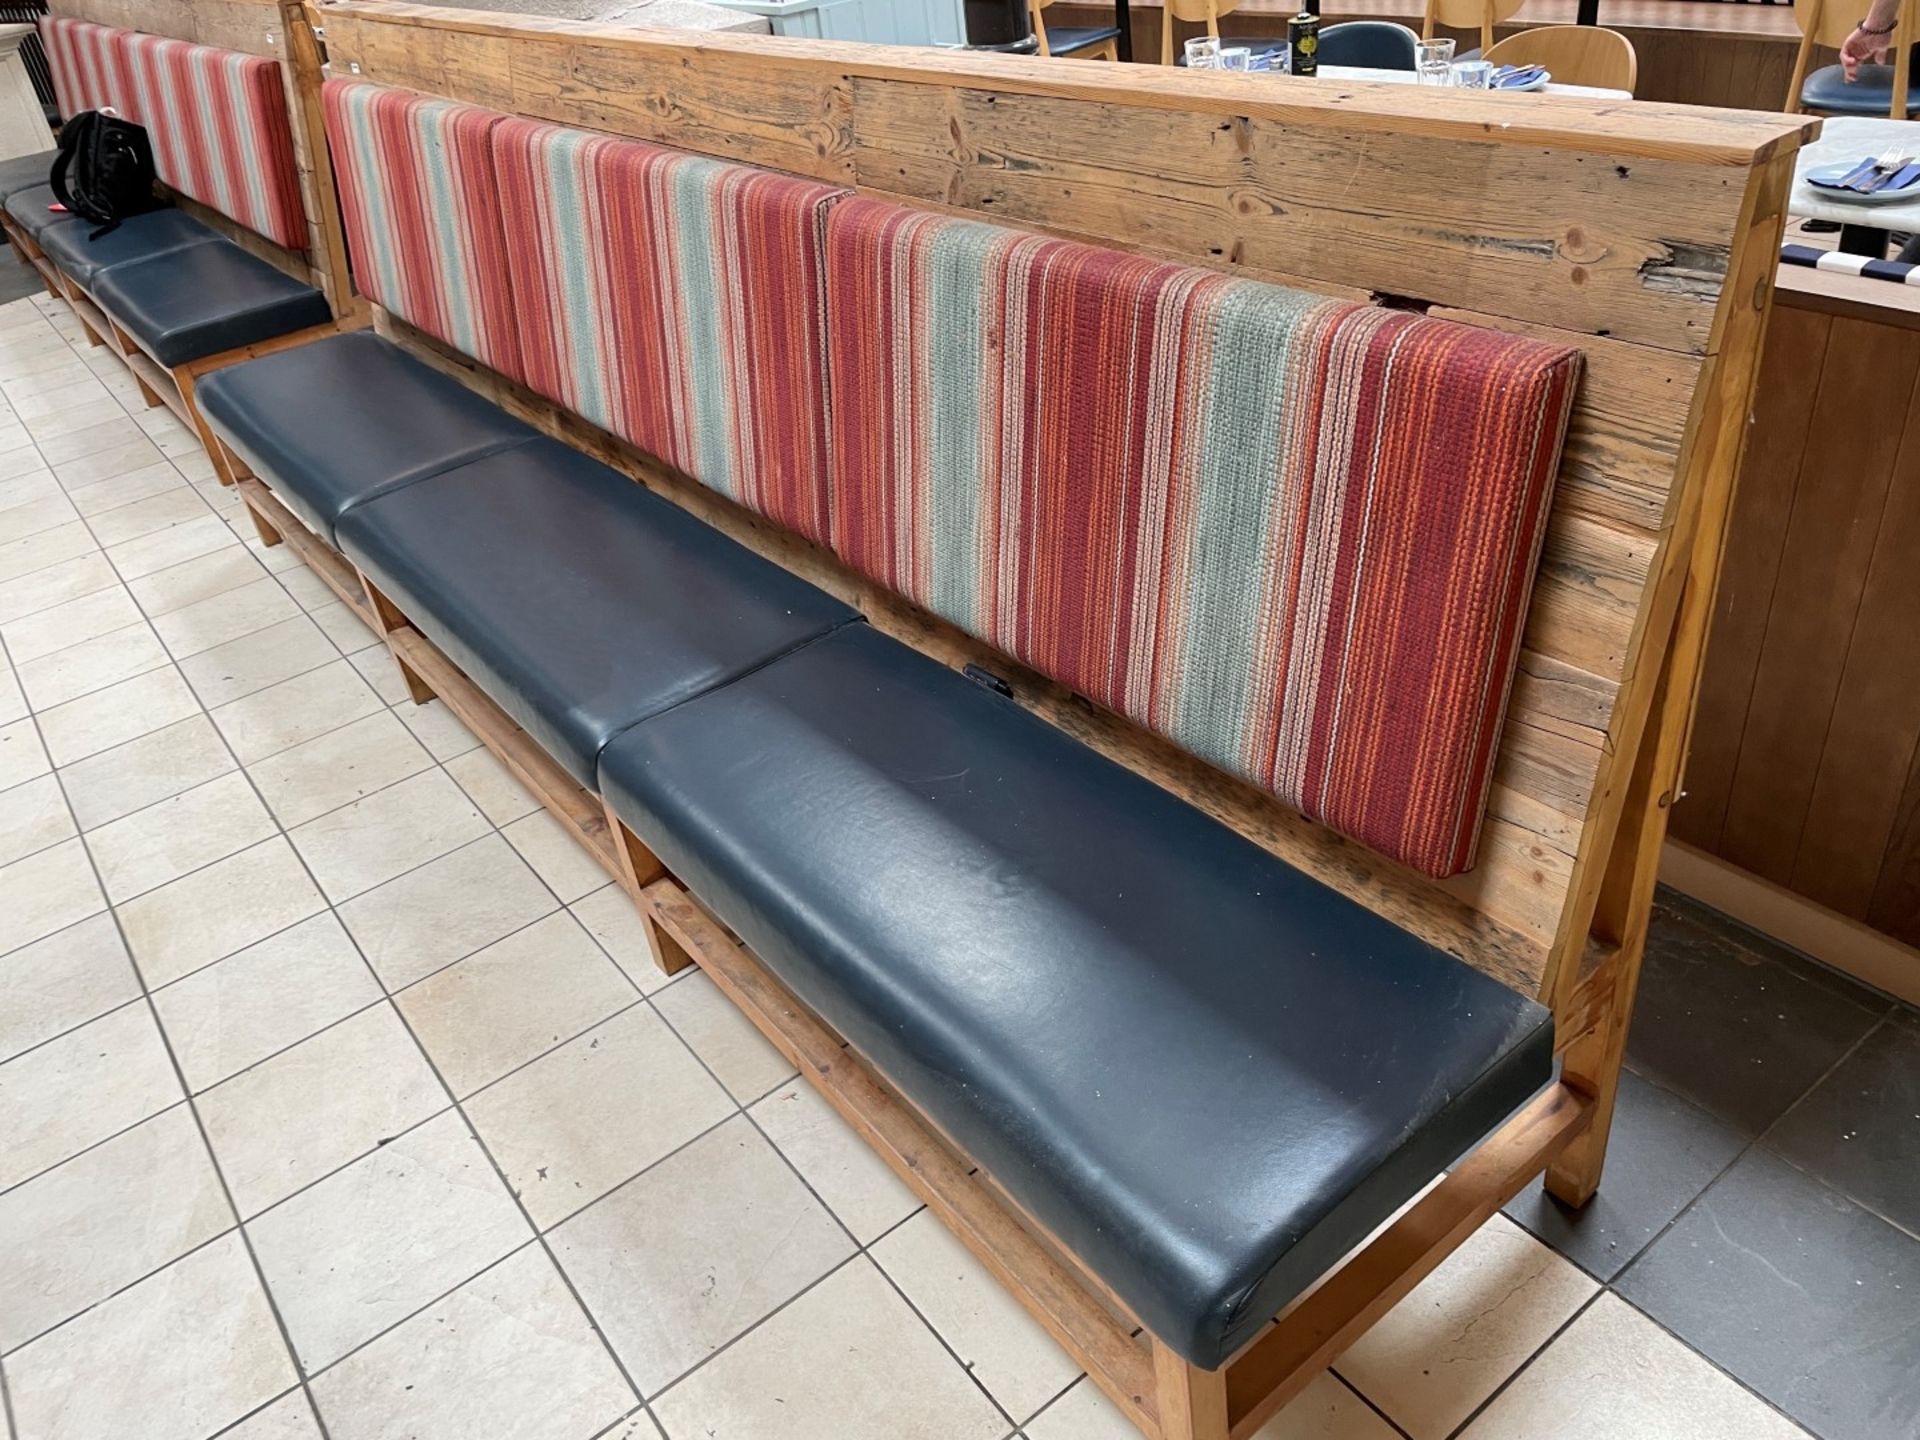 1 x Wooden Seating Bench Featuring Genuine Leather Seat Pads and Striped Fabric Back Rests - Image 3 of 12